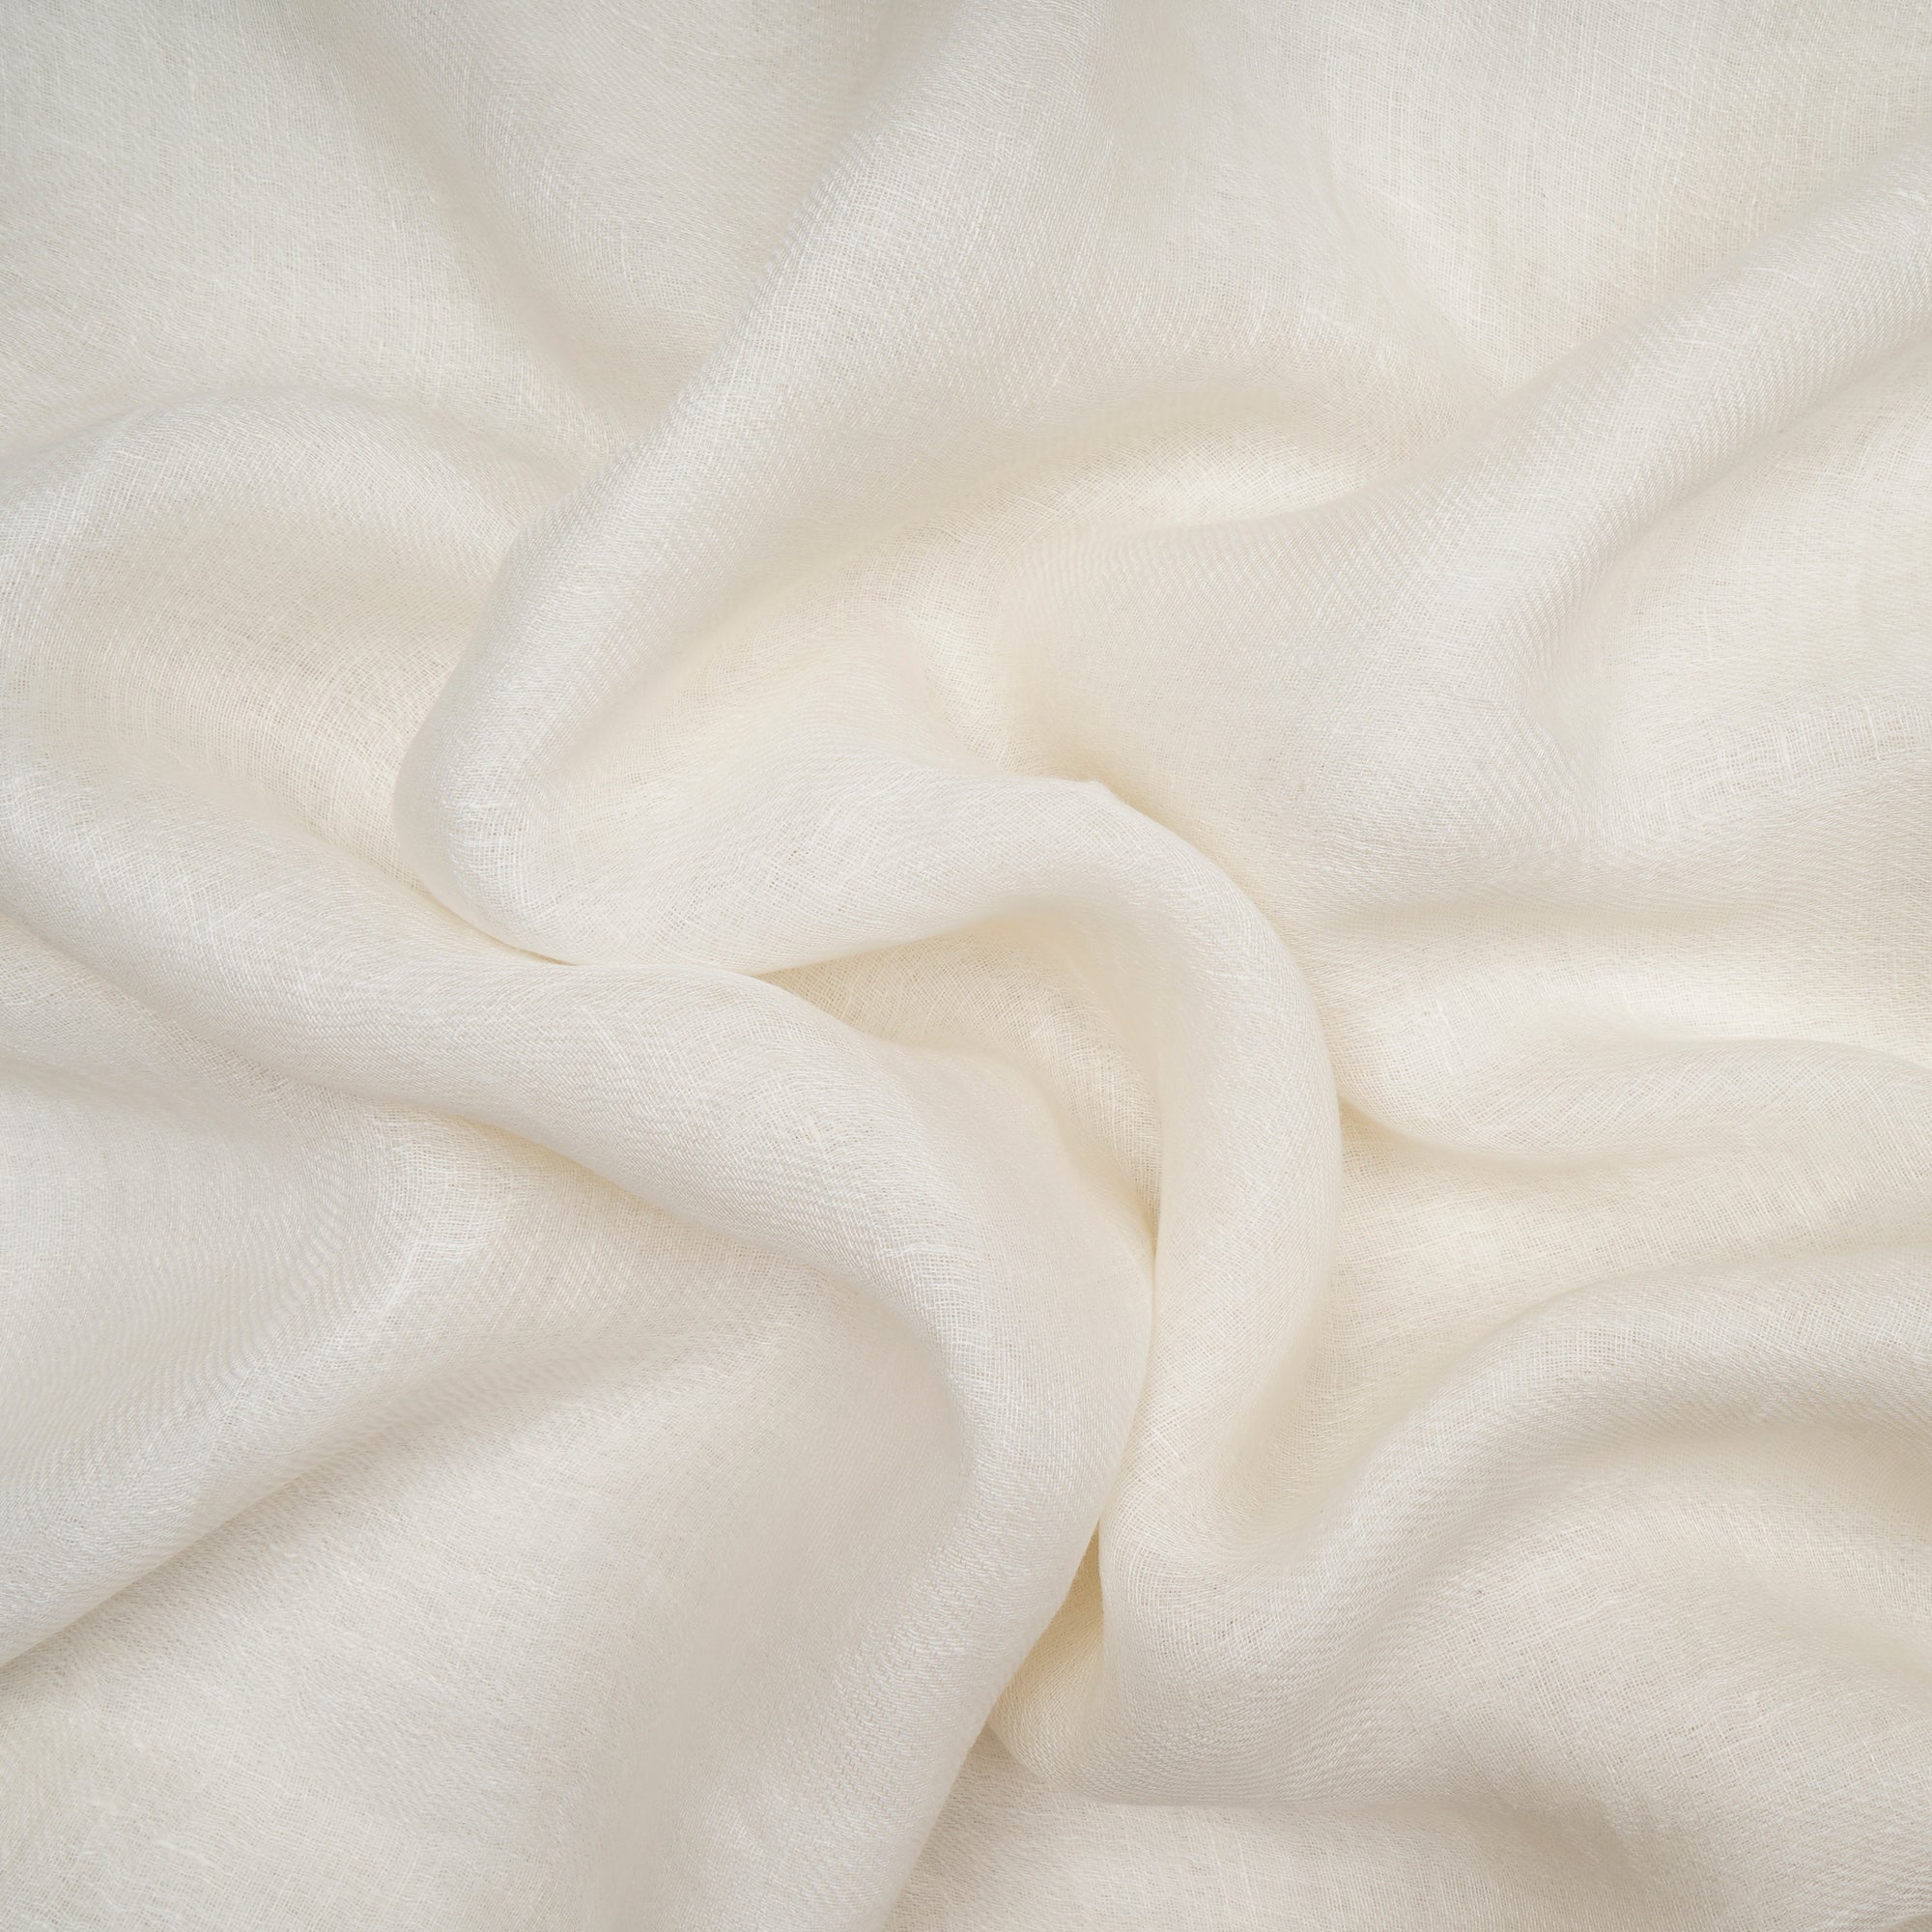 100% cotton mull woven pure cotton fabric Dyeable 44/ wide also ready –